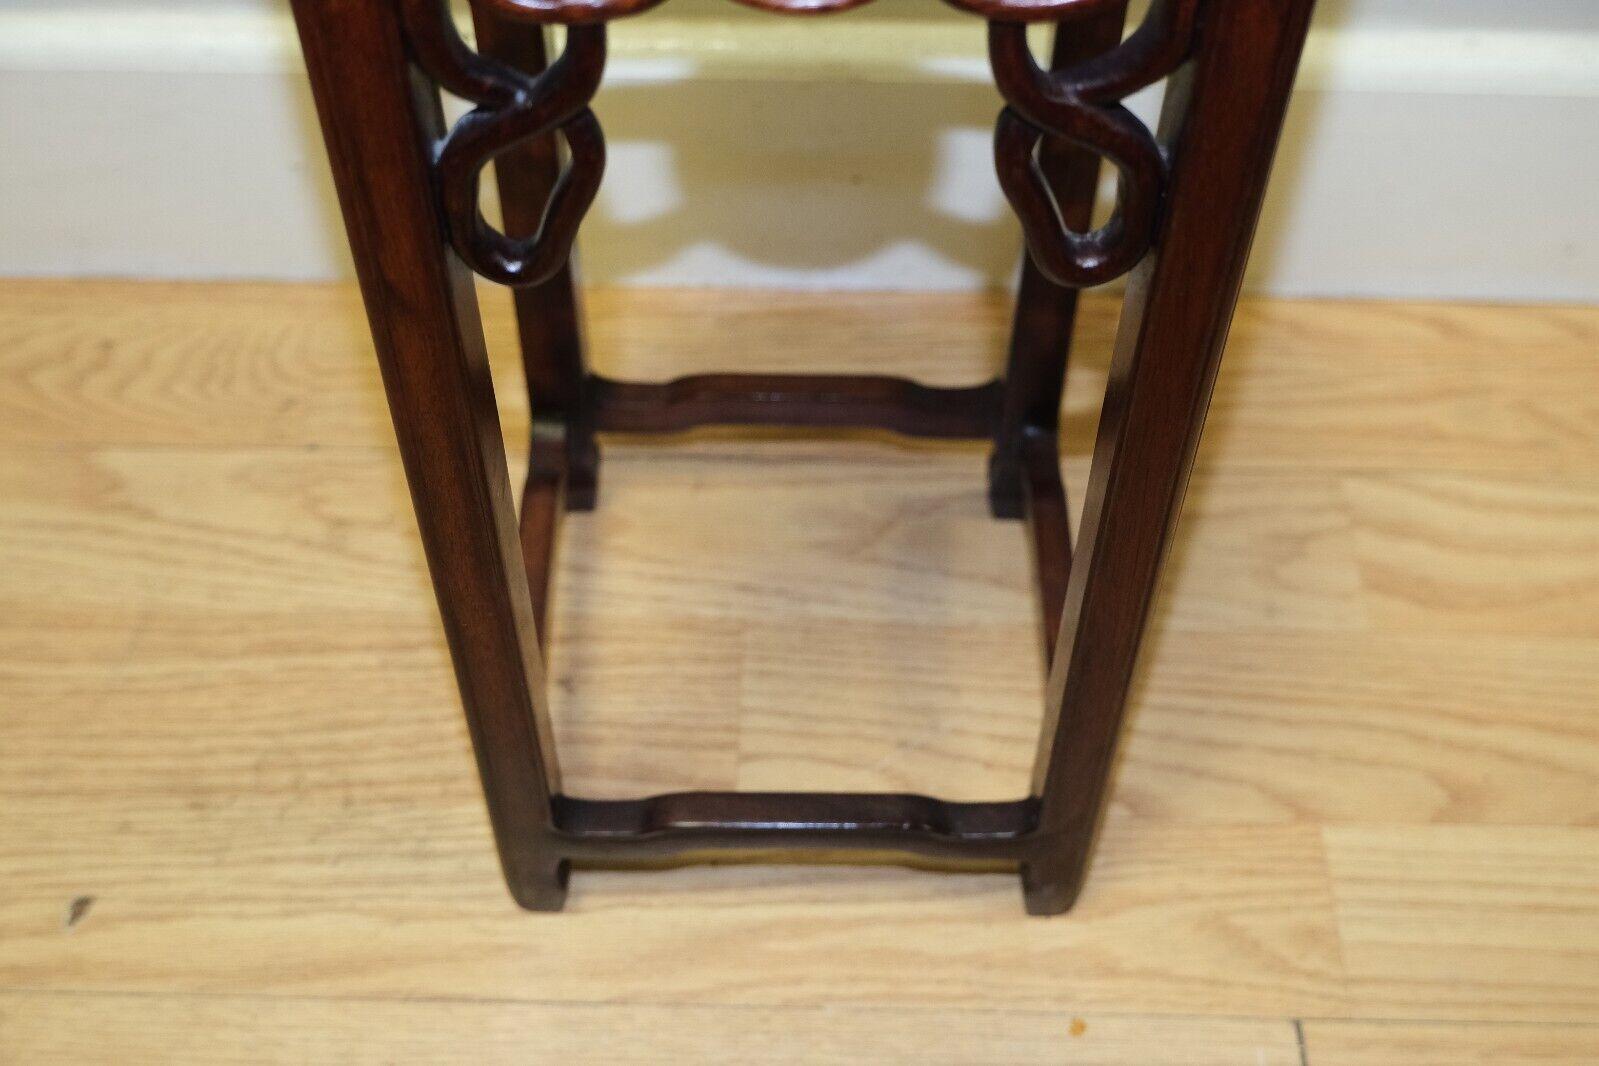 SMALL BROWN CHINESE HARDWOOD PLANT STAND WiTH LOVELY HANDCARVED DETAILS 3